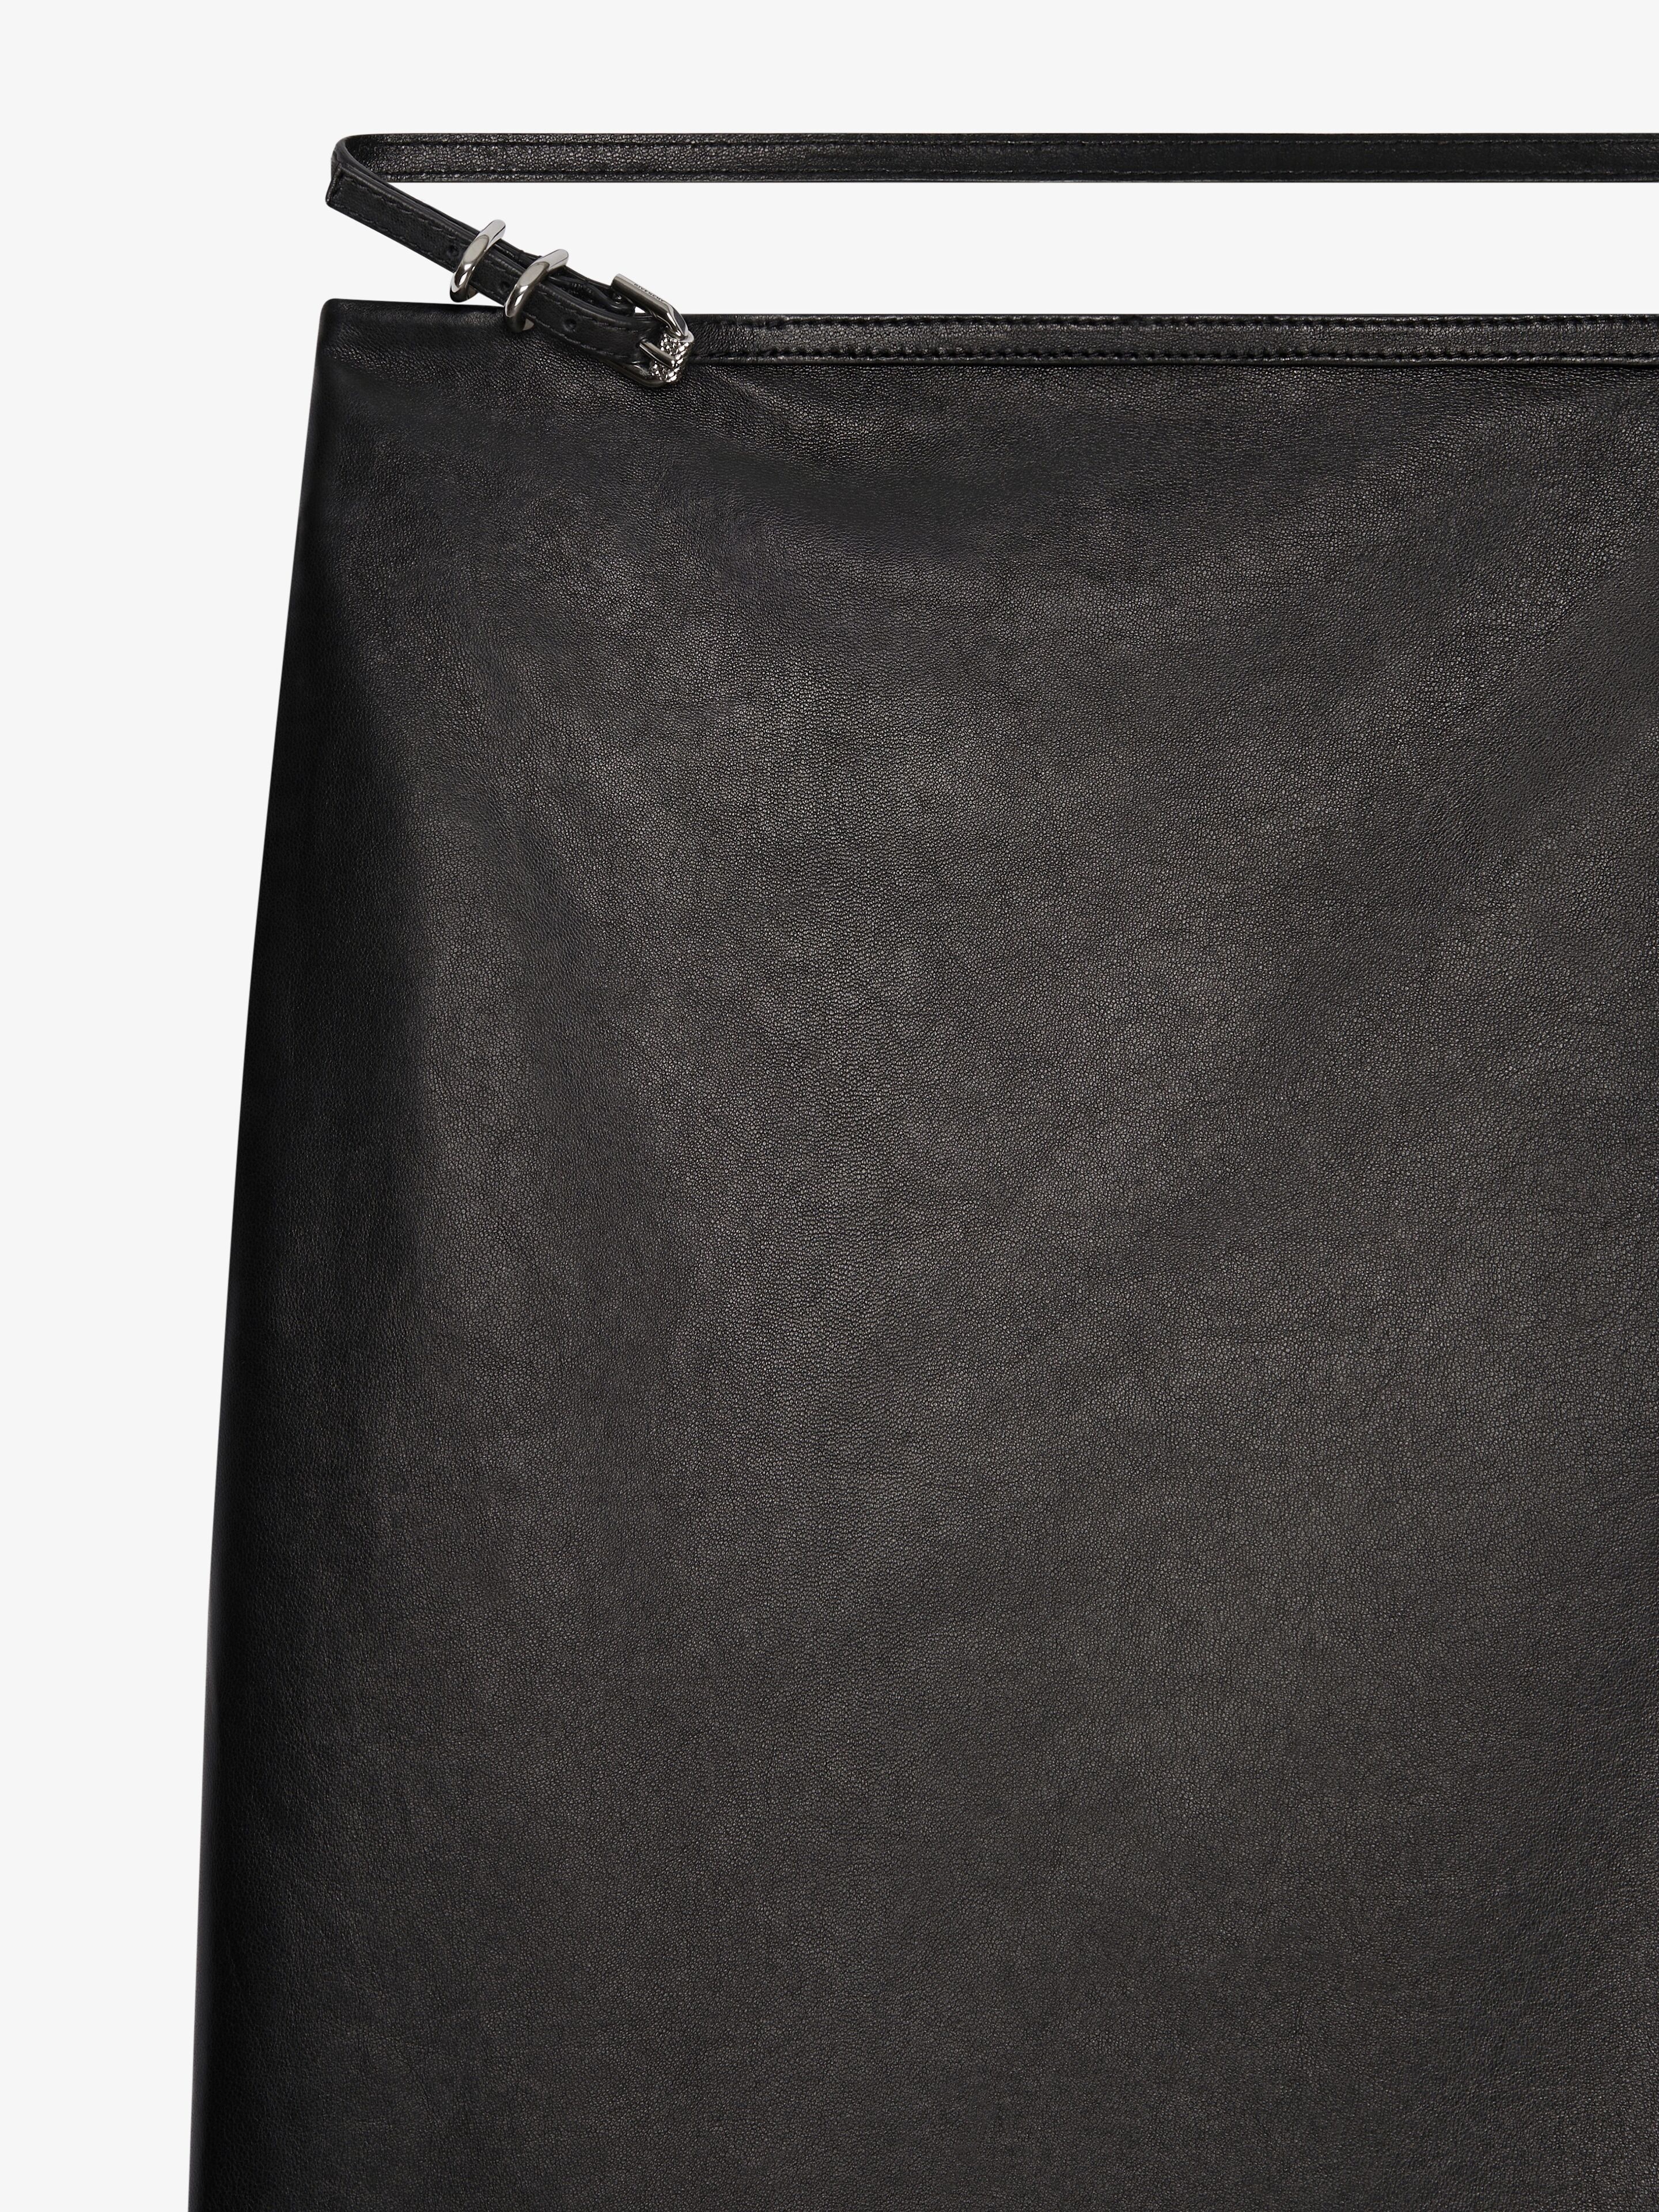 VOYOU WRAP SKIRT IN LEATHER - 5